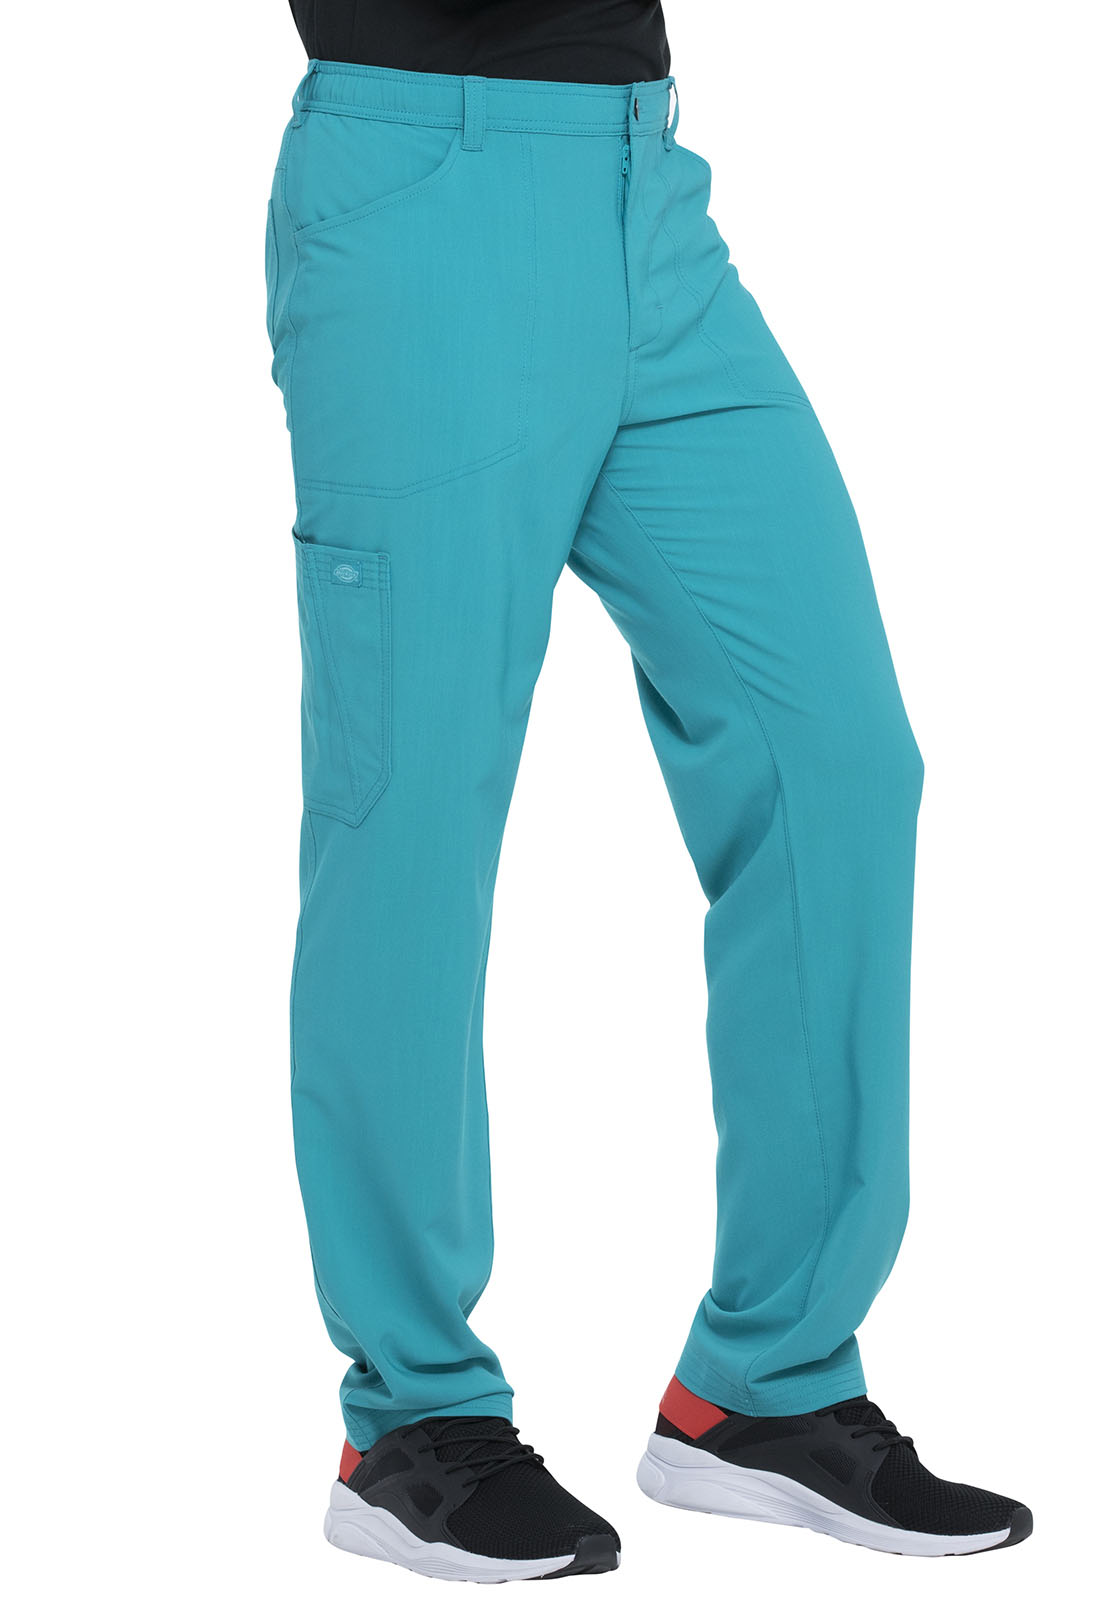 Dickies Advance Men's Straight Leg Zip Fly Cargo Pant in Teal Blue from ...